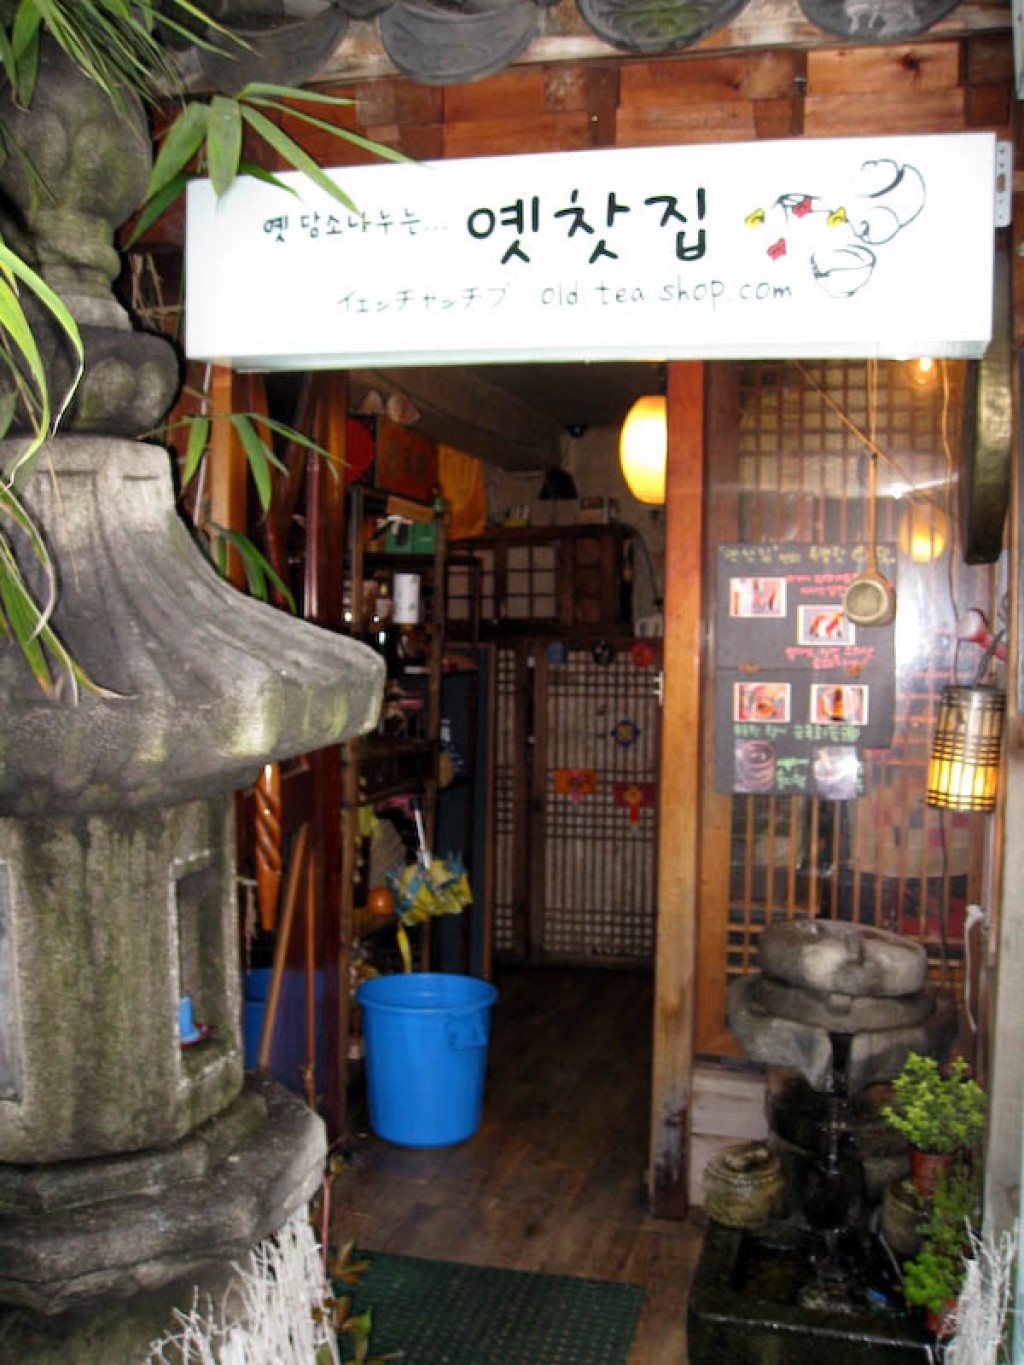 Our final stop in Seoul (and Korea) was a traditional Tea Shop called Yetchatjip (oldteashop.com) where we got tea and cookies for quite a high price - but, when in Korea...